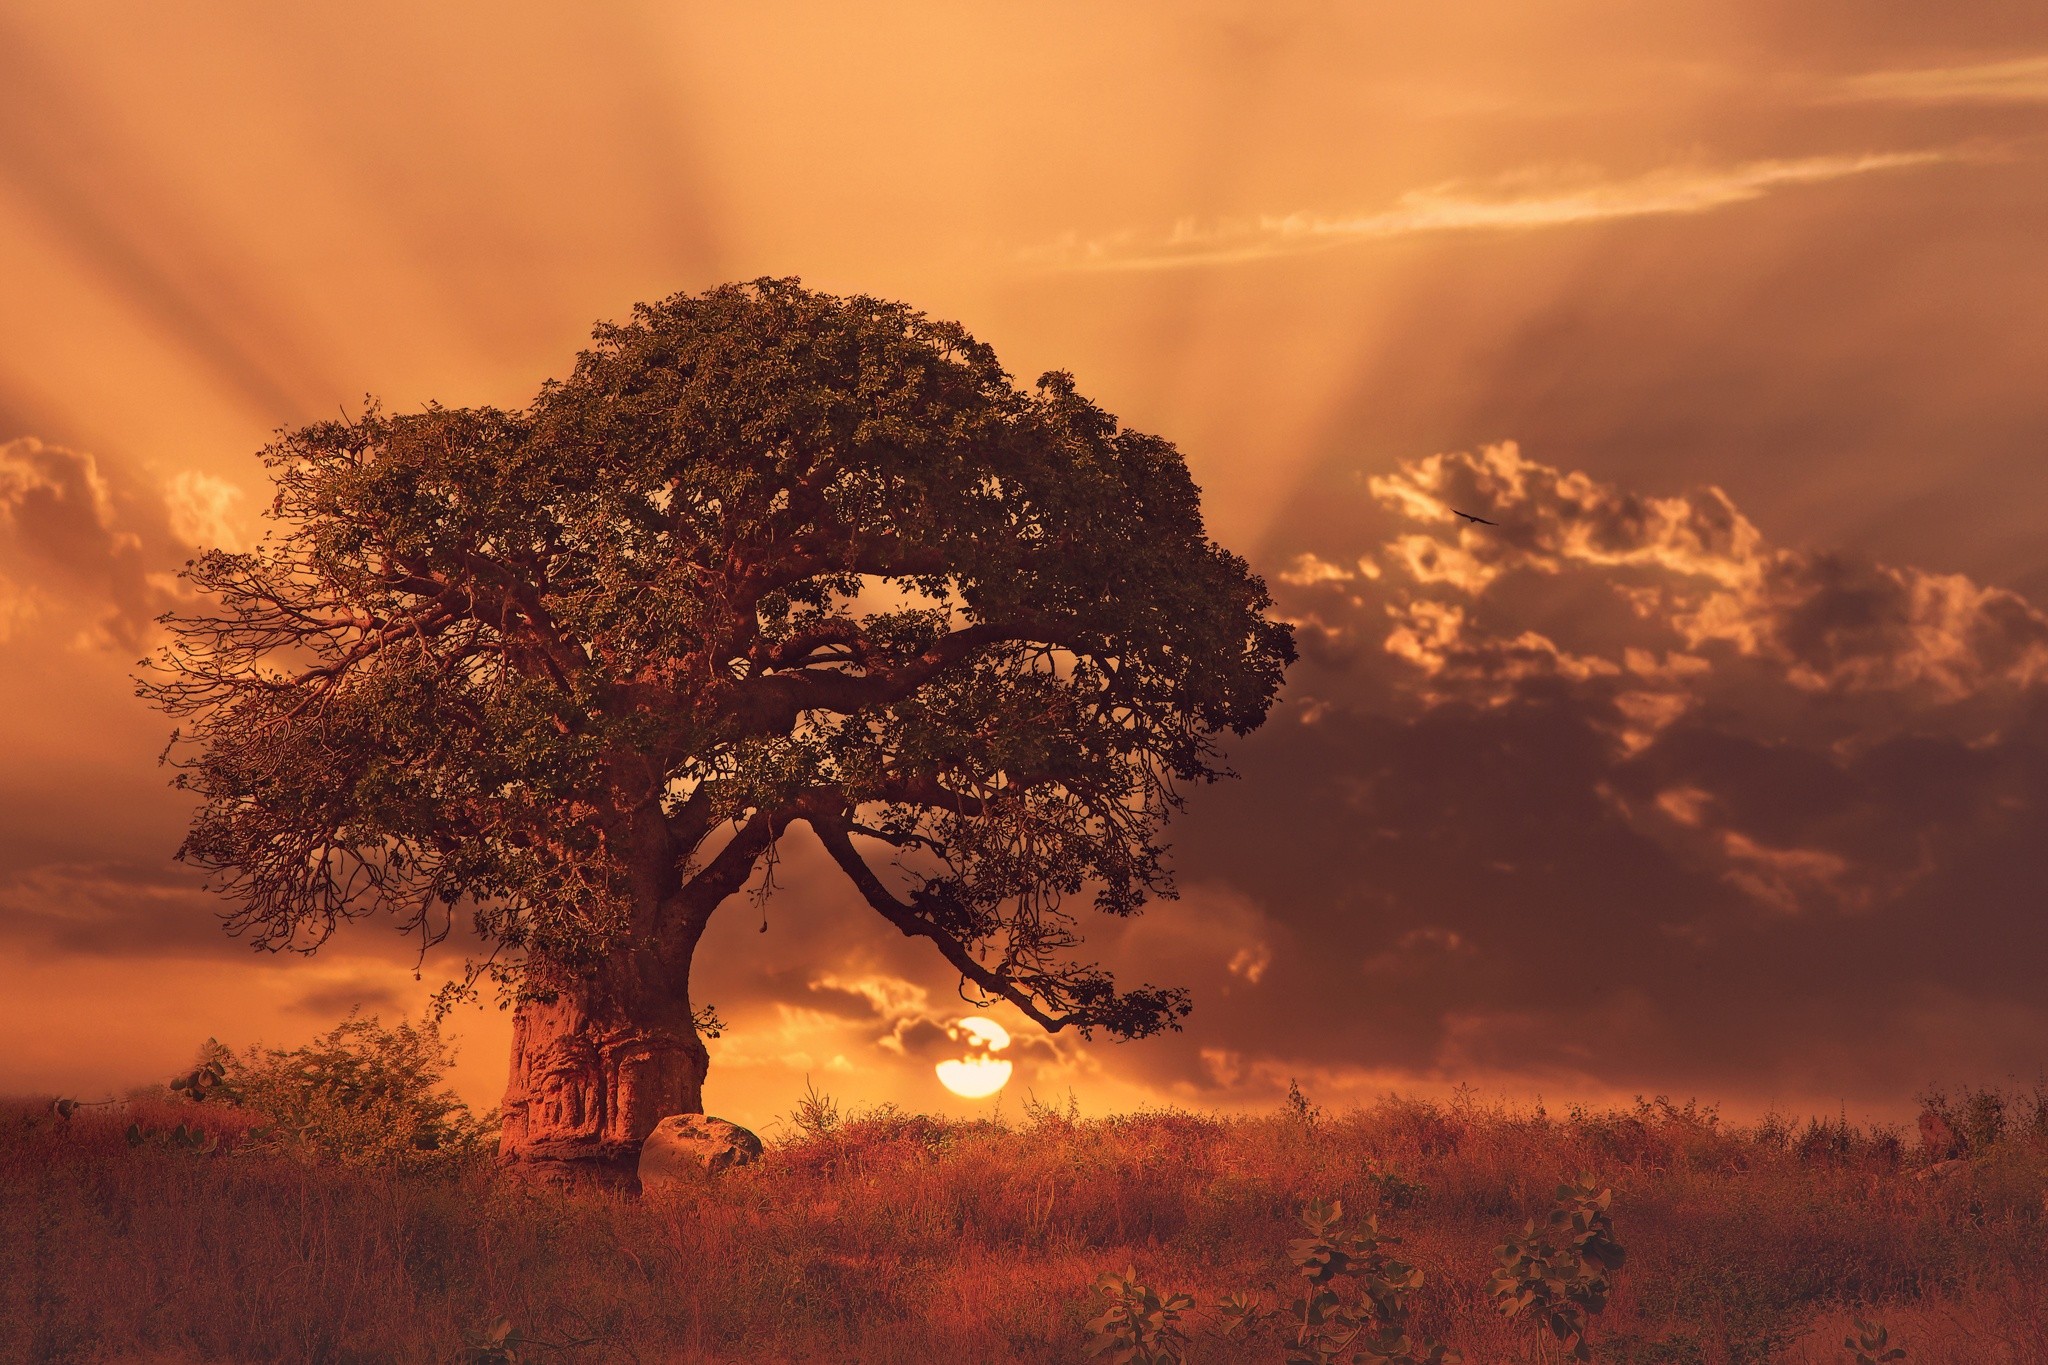 General 2048x1365 nature landscape sunset trees baobab trees clouds Africa grass sun rays